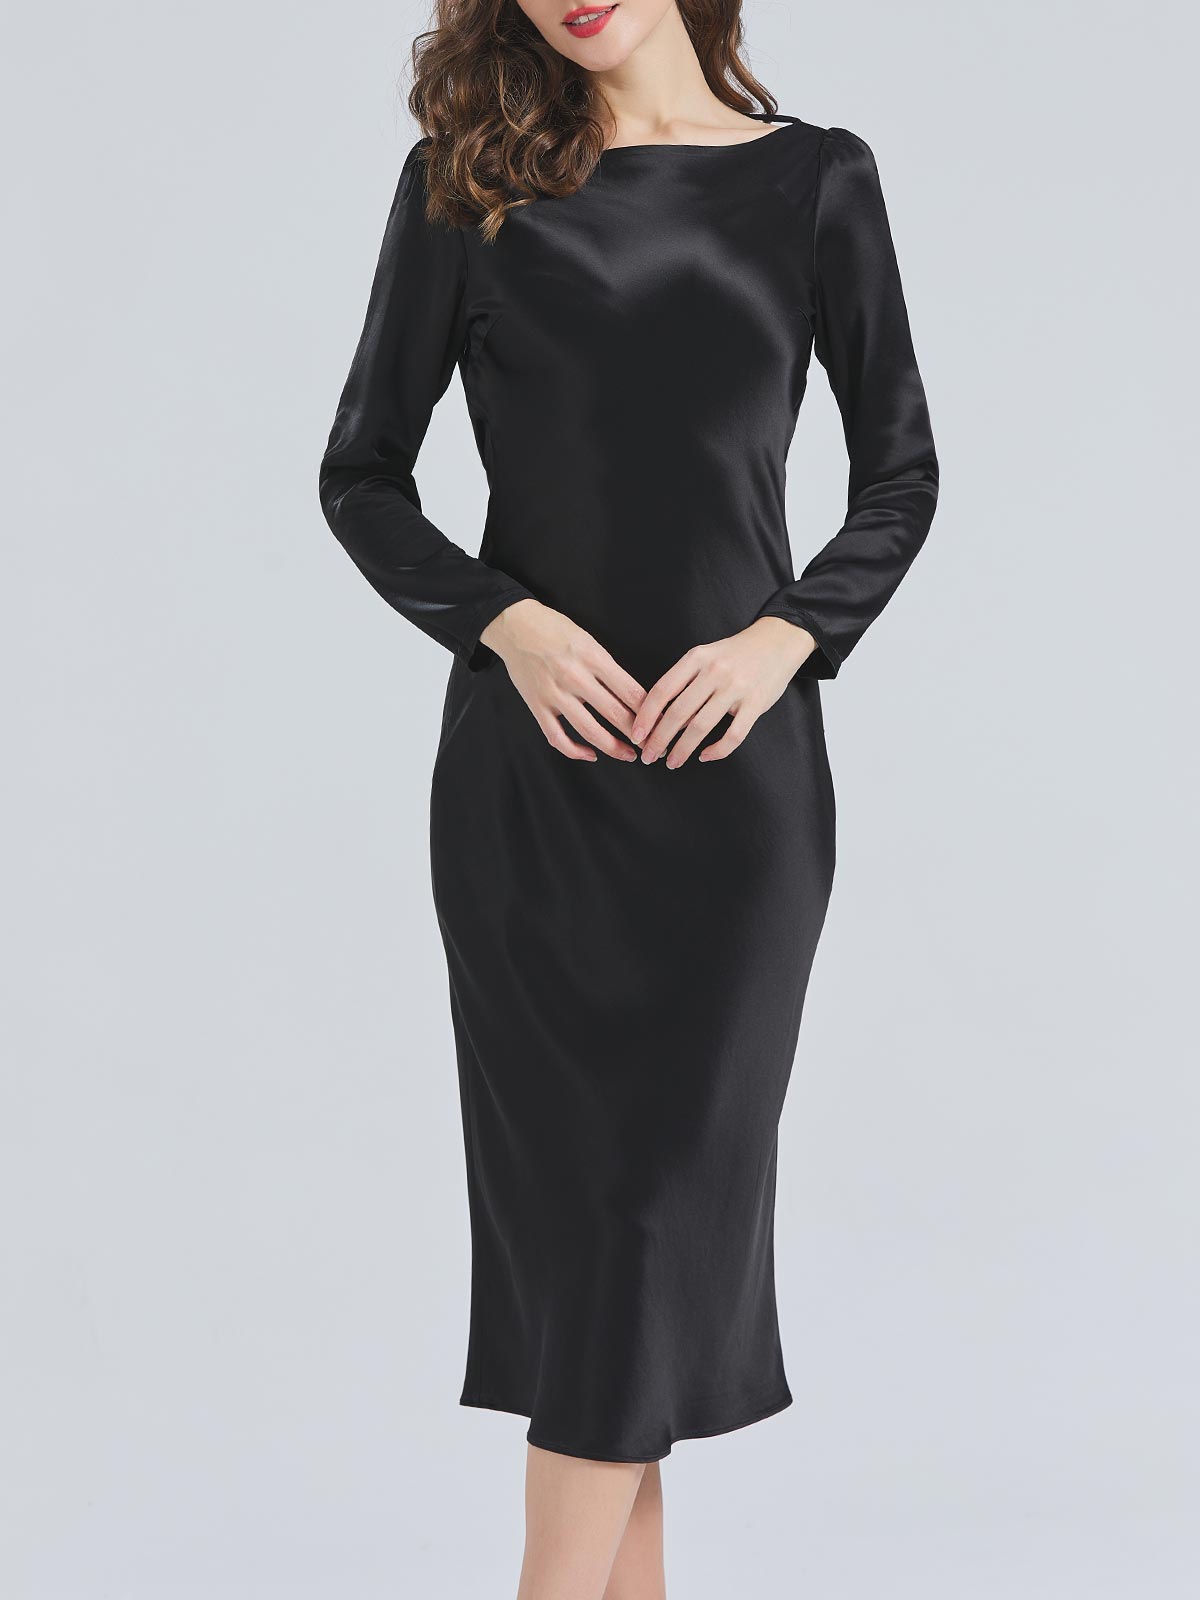 Fancy designer wedding and Party wear long black gown